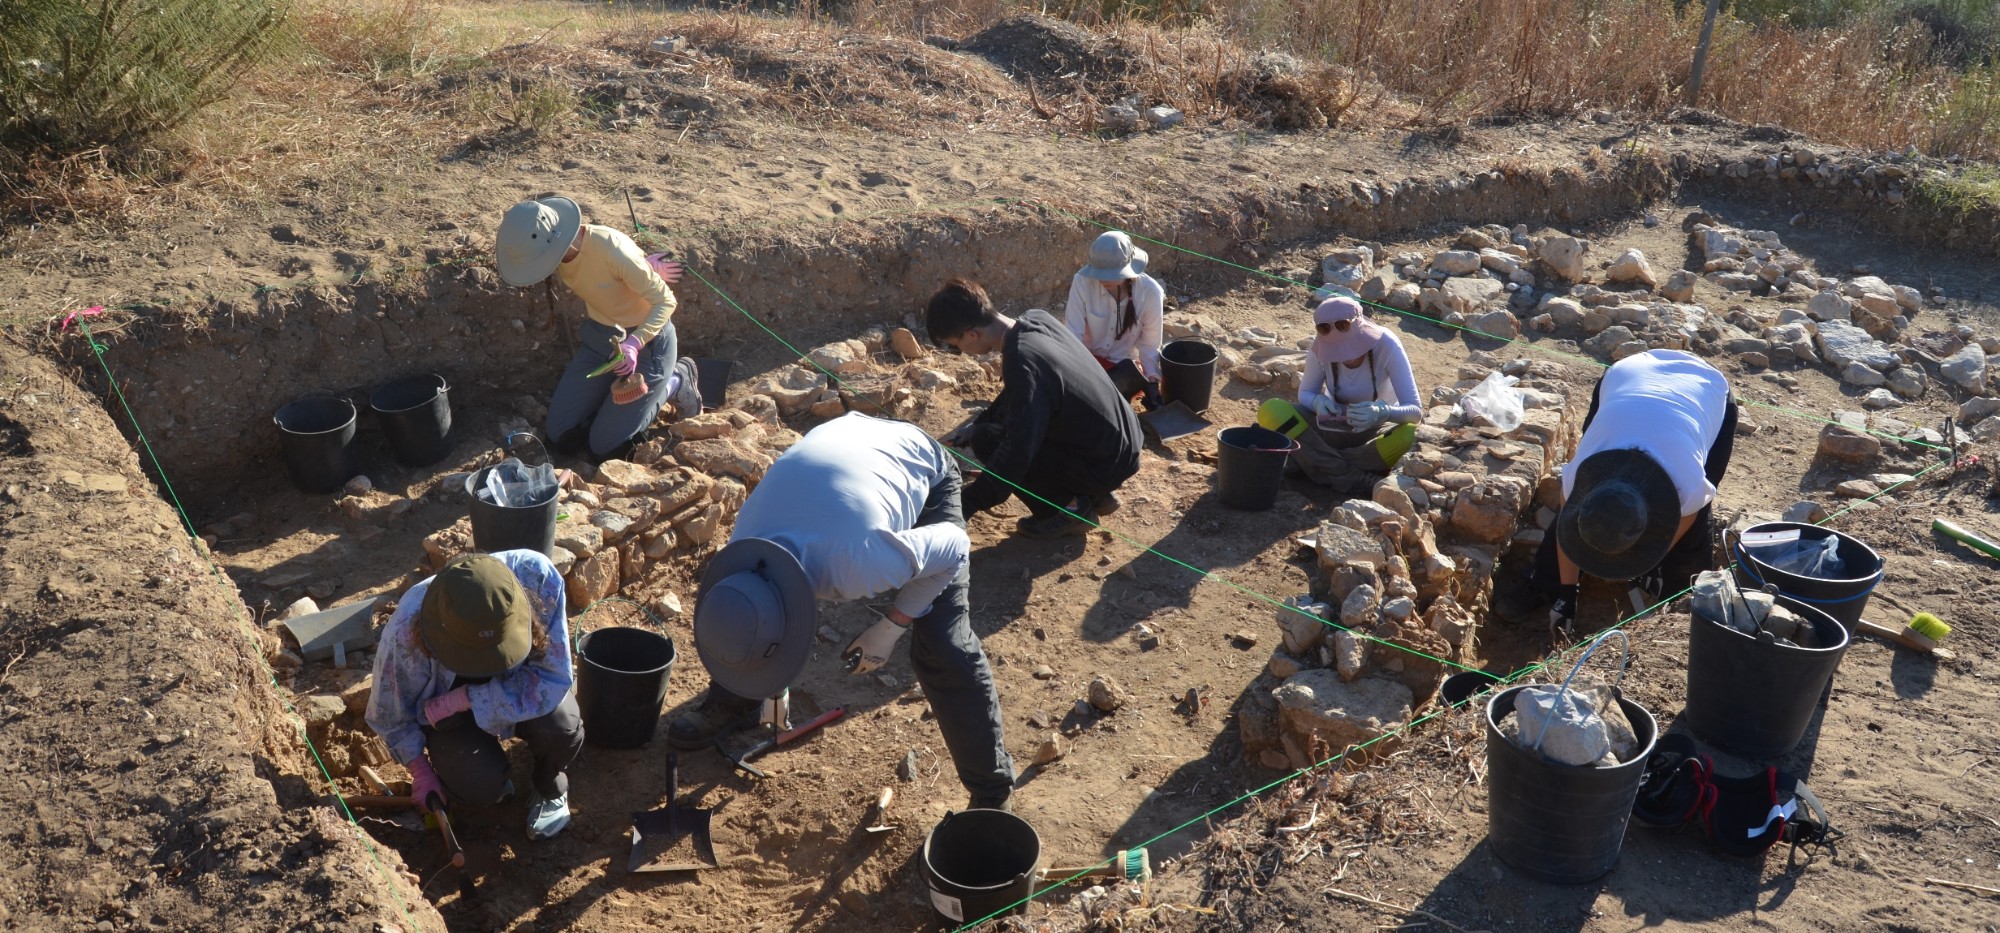 Seven SFU students, wearing wide brim hats, using dig tools to excavate site at Cacala Velha Village, Algarve, Portugal